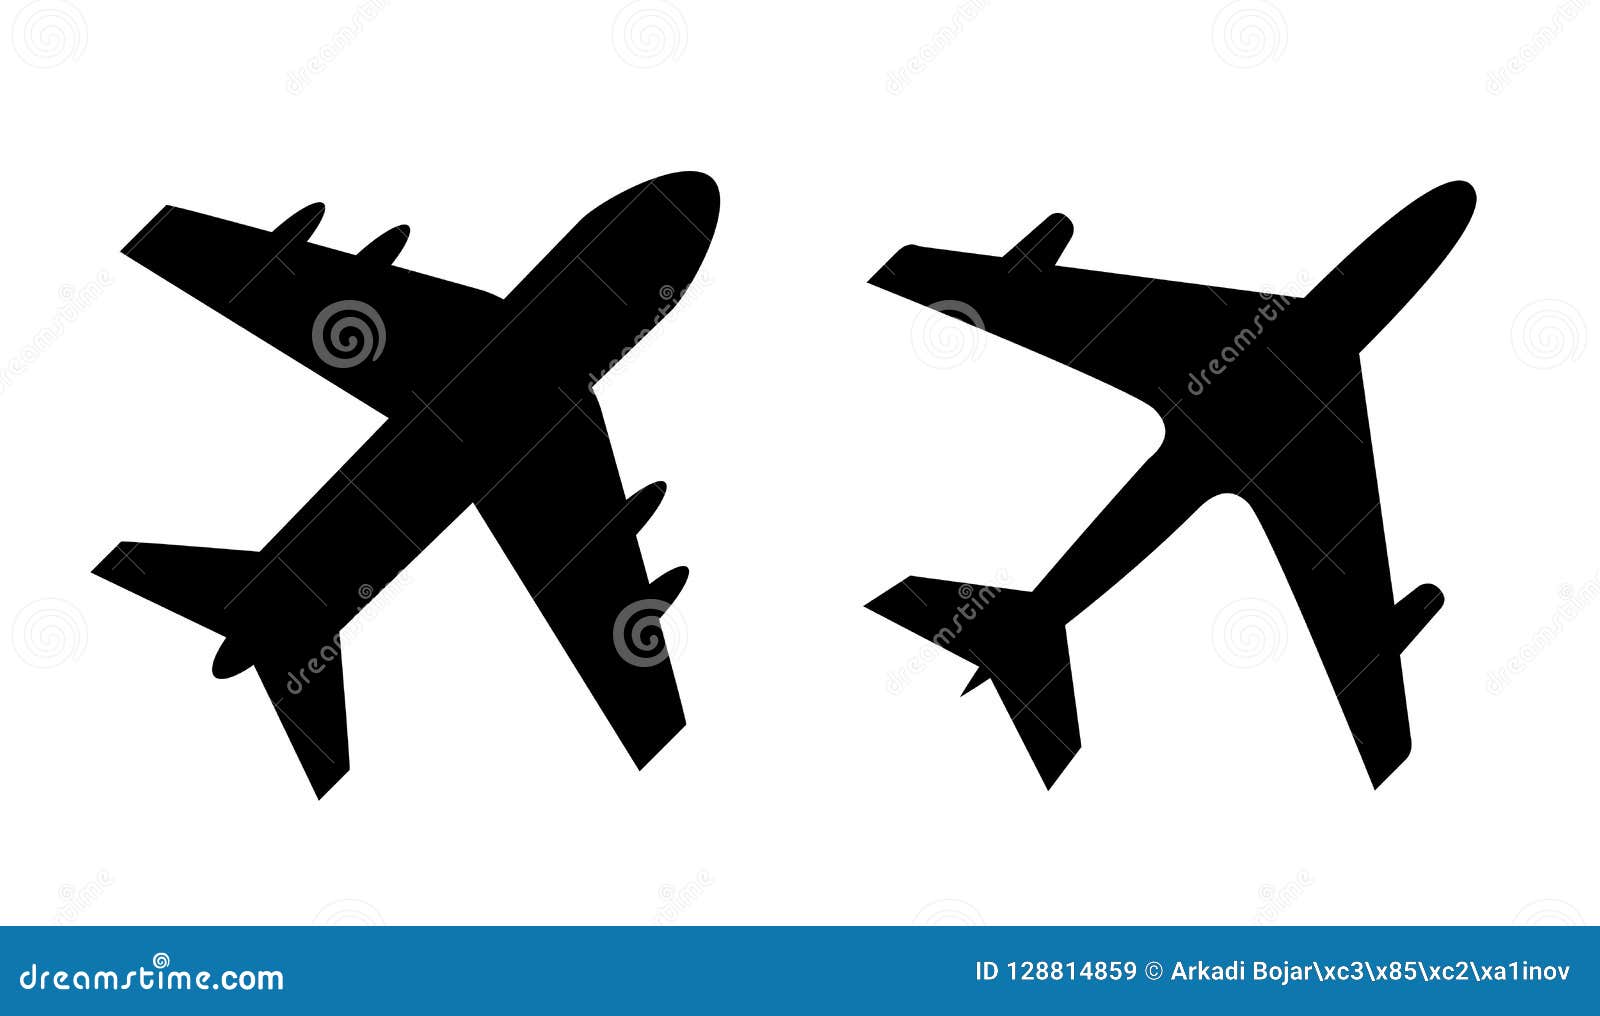 Airplane Vector Silhouette Icon Stock Vector - Illustration of planes ...